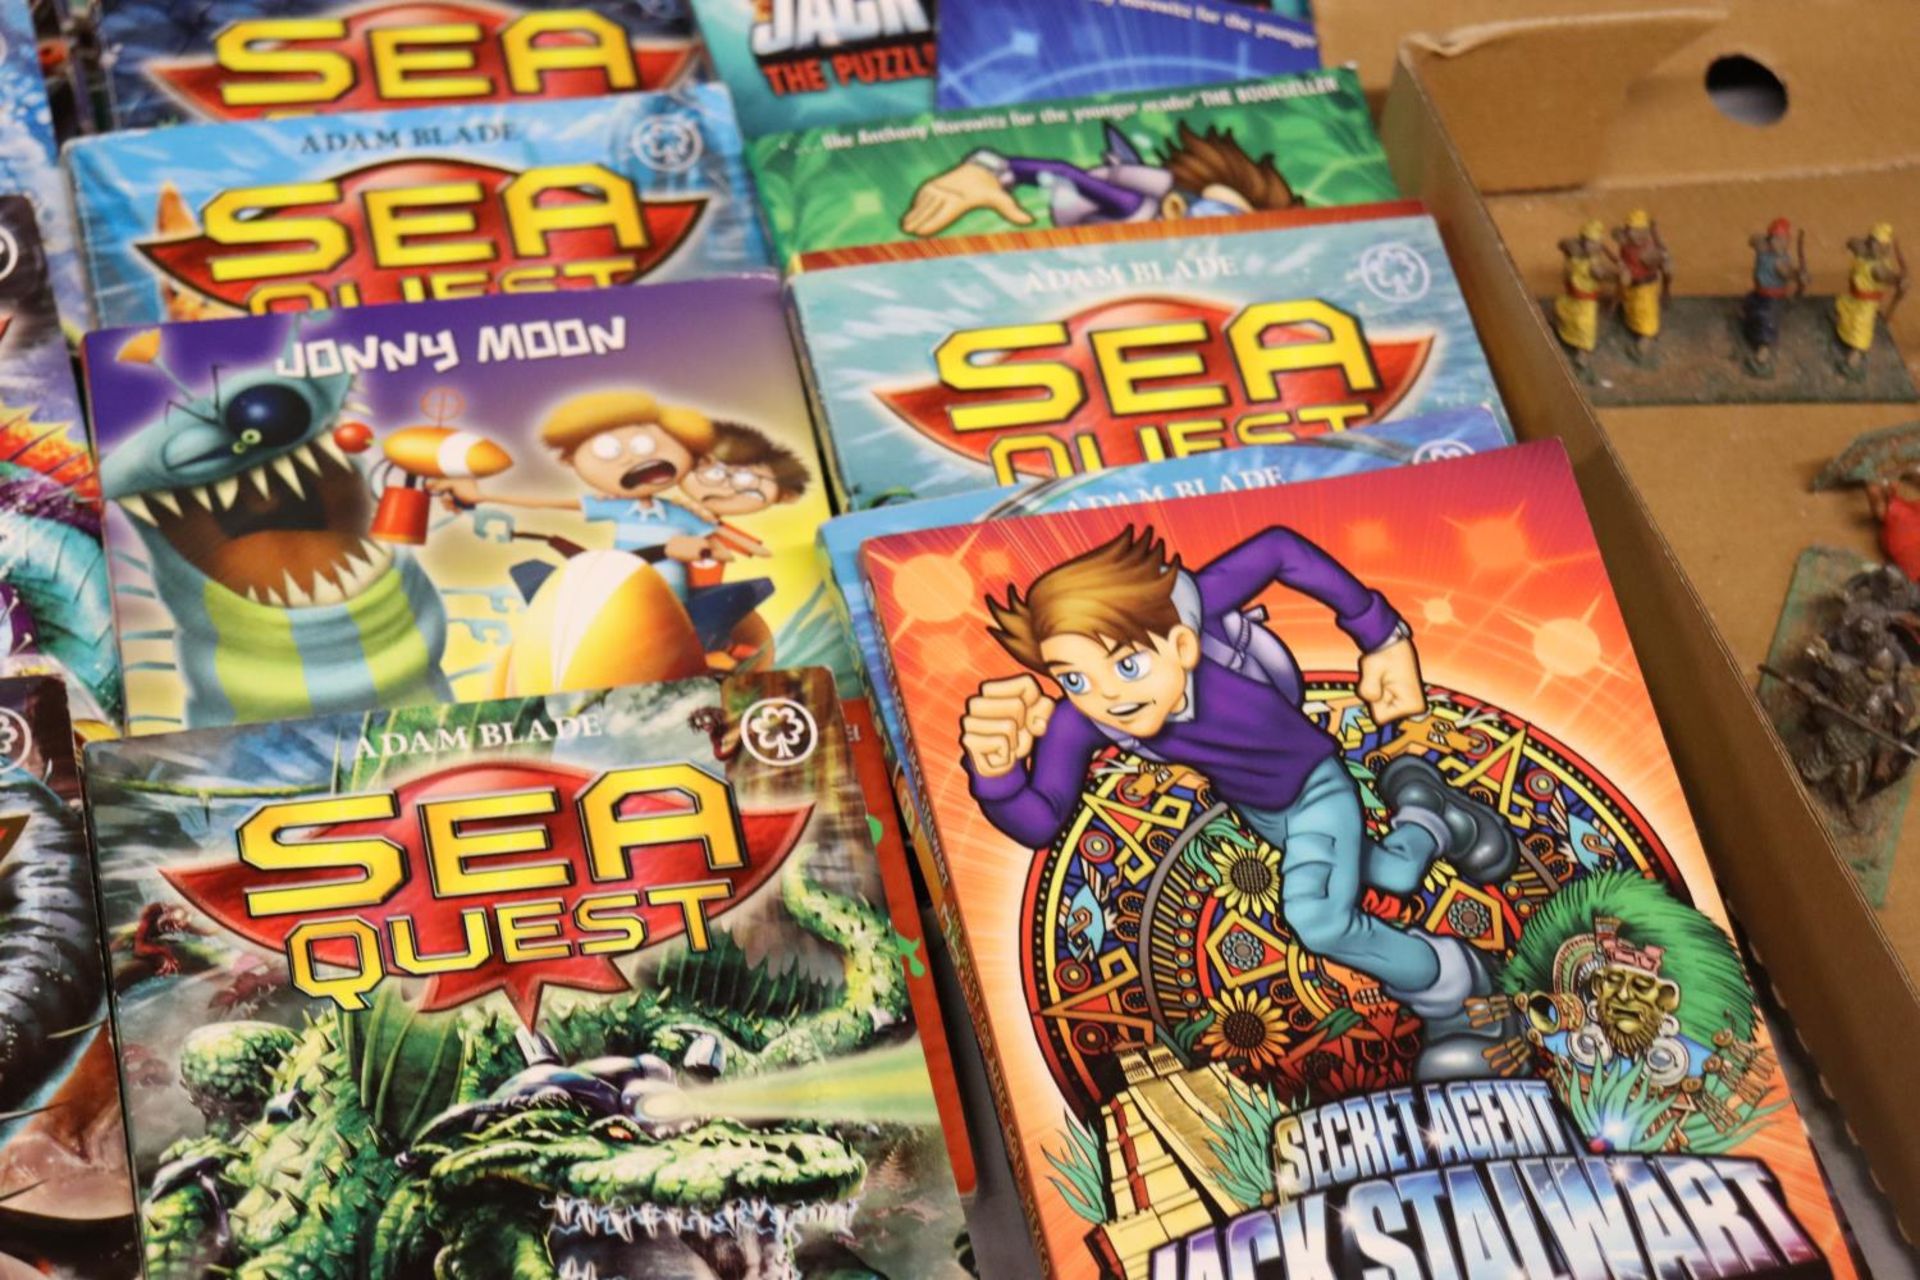 A LARGE COLLECTION OF CHILDREN'S BOOKS TO INCLUDE 'SEA QUEST' BY ADAM BLADE AND SECRET AGENT JACK - Bild 5 aus 5